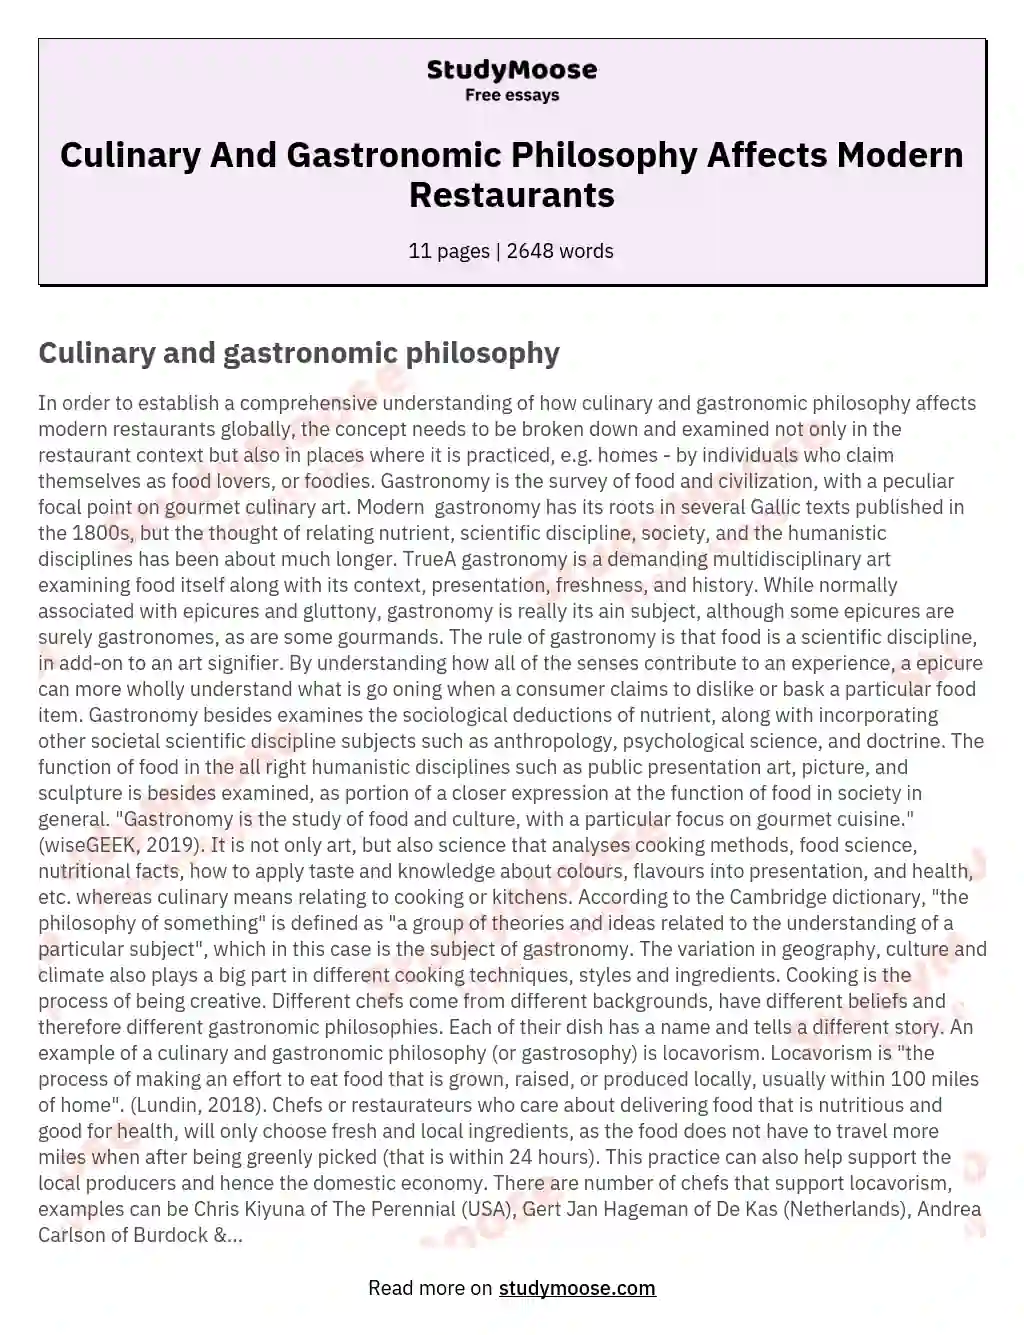 Culinary And Gastronomic Philosophy Affects Modern Restaurants